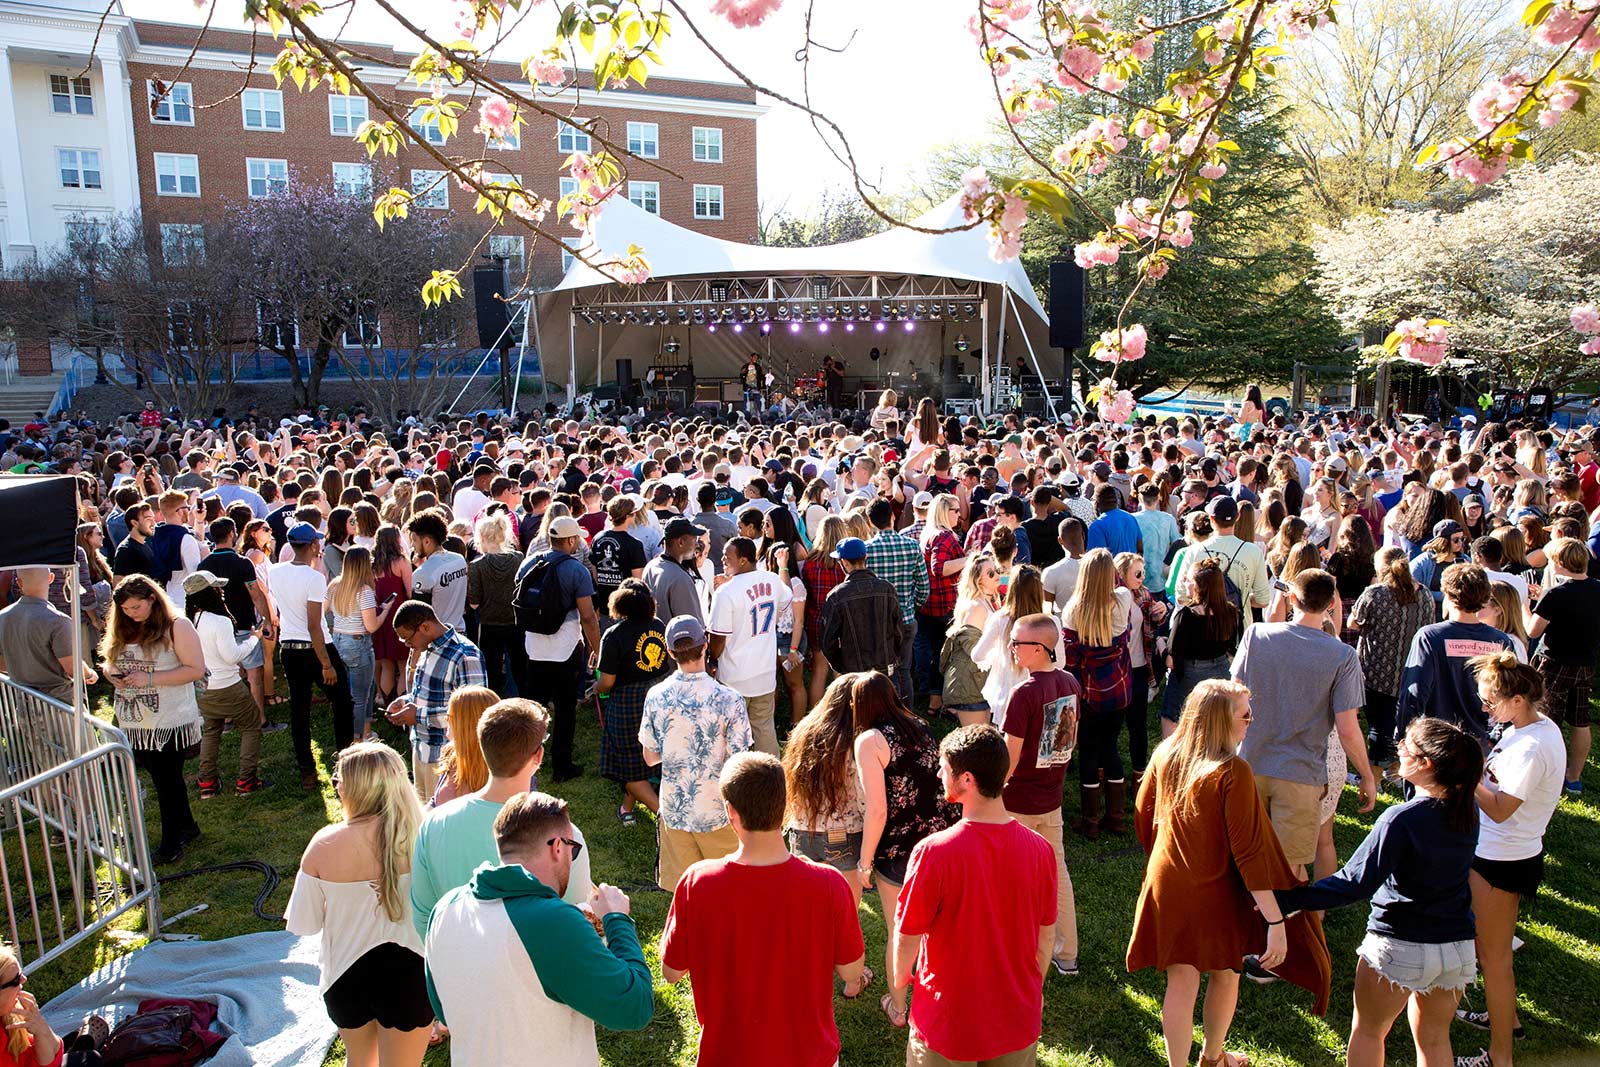 Stubbs Lawn, where students gather for entertainment and fun, is home to activities during the two big weekends each year—Oktoberfest and Spring Weekend.